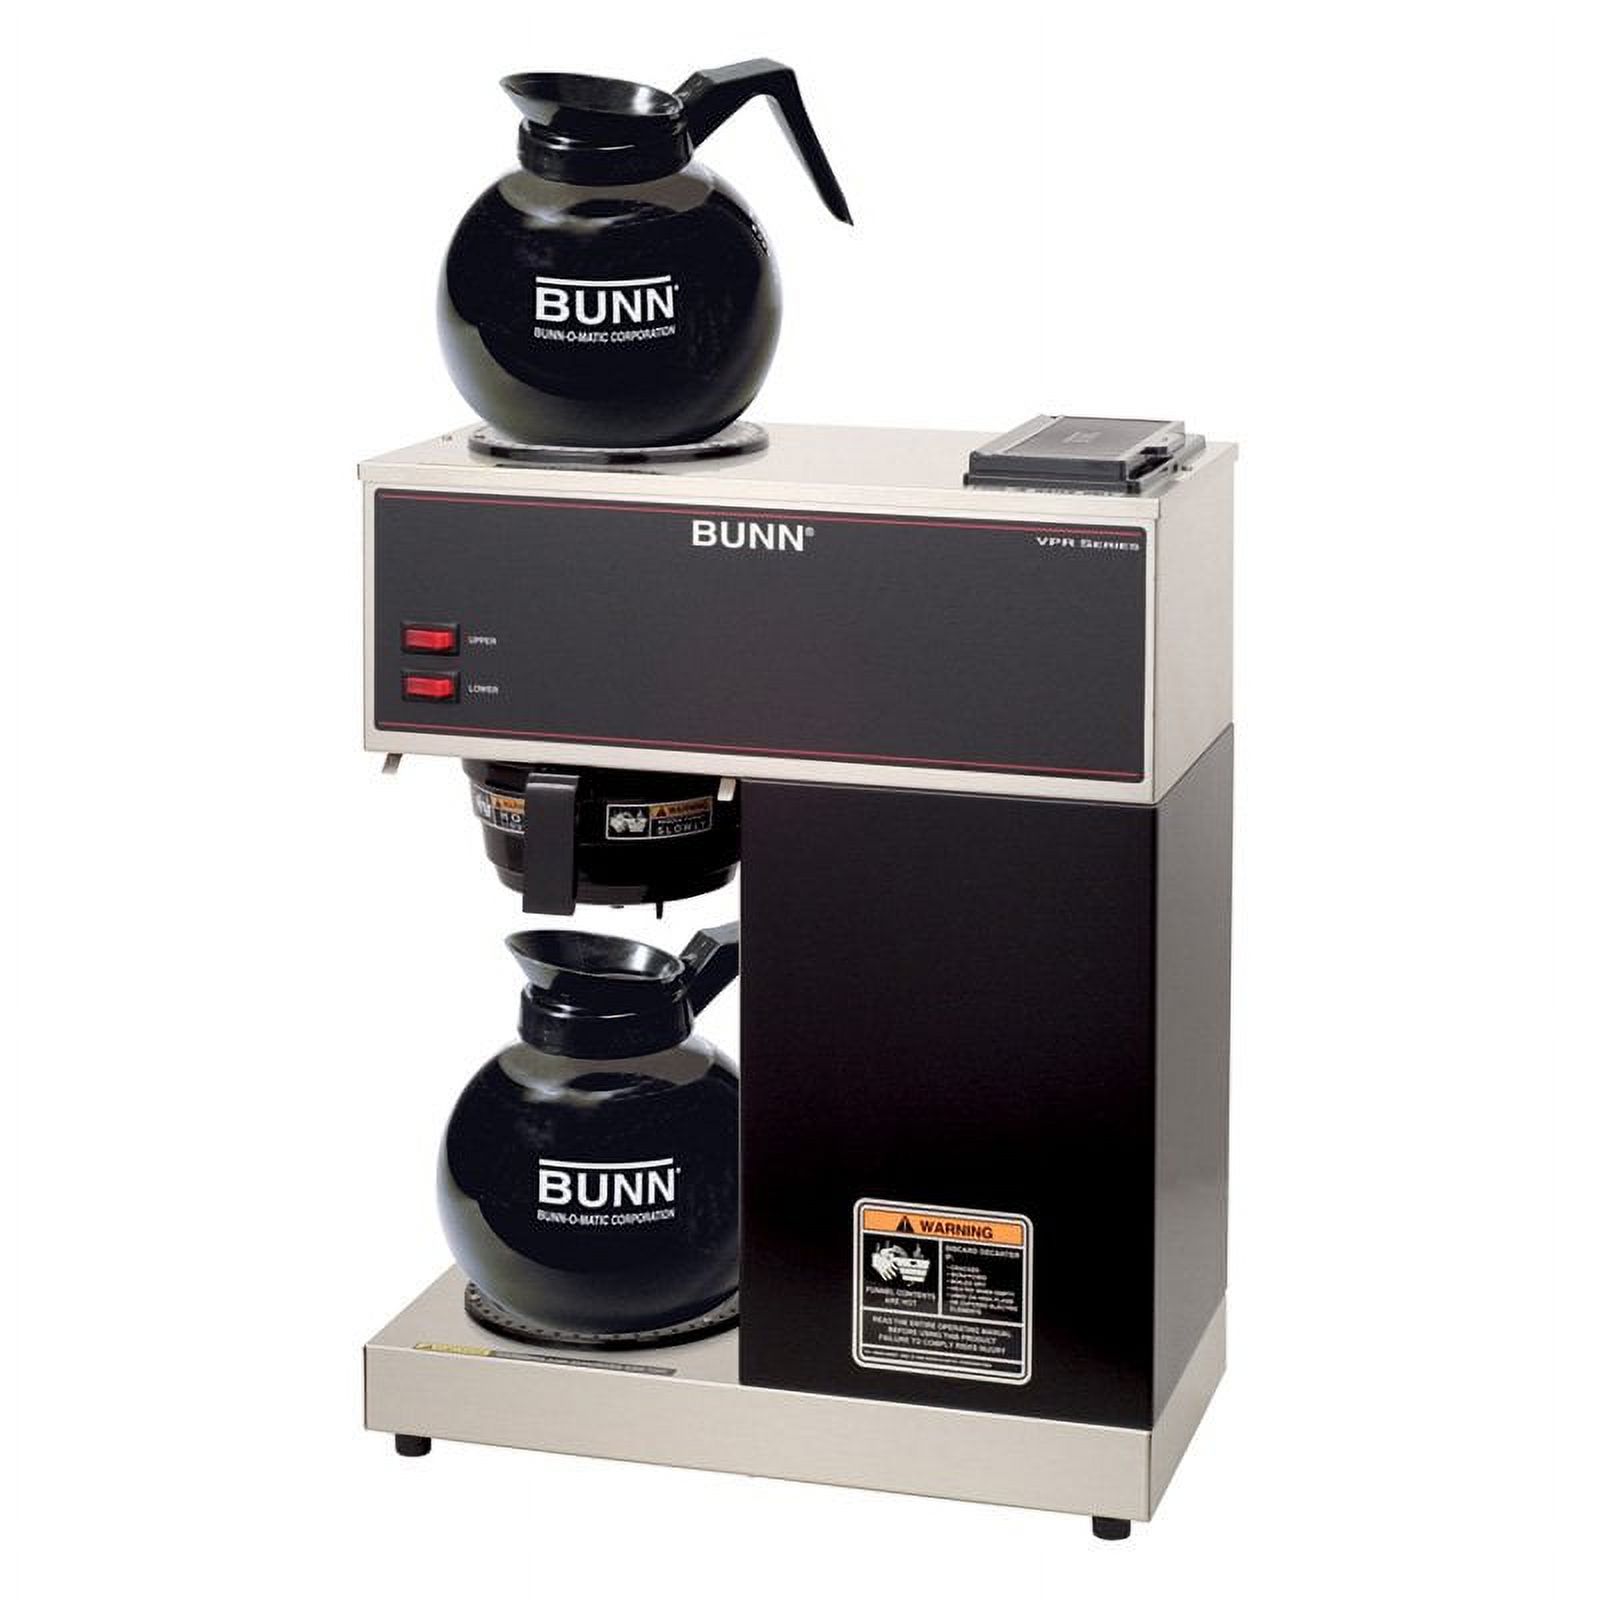 BUNN VPR 12-Cup Commercial Coffee Brewer with Two Glass Decanters, 2 Warmers - image 1 of 2